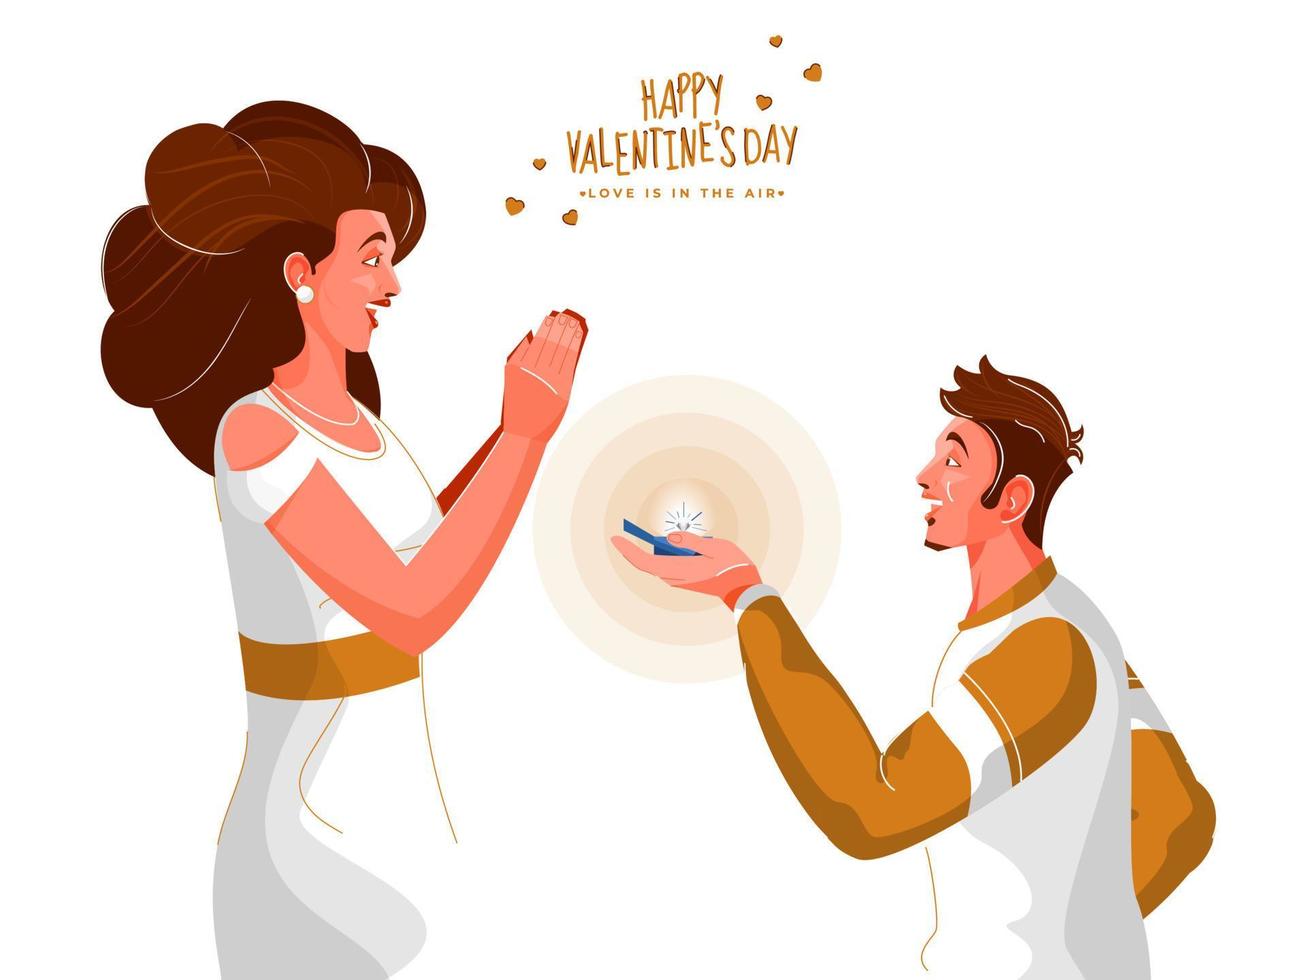 Young Boy Proposing to His Girlfriend on the Occasion of Happy Valentine's Day. vector